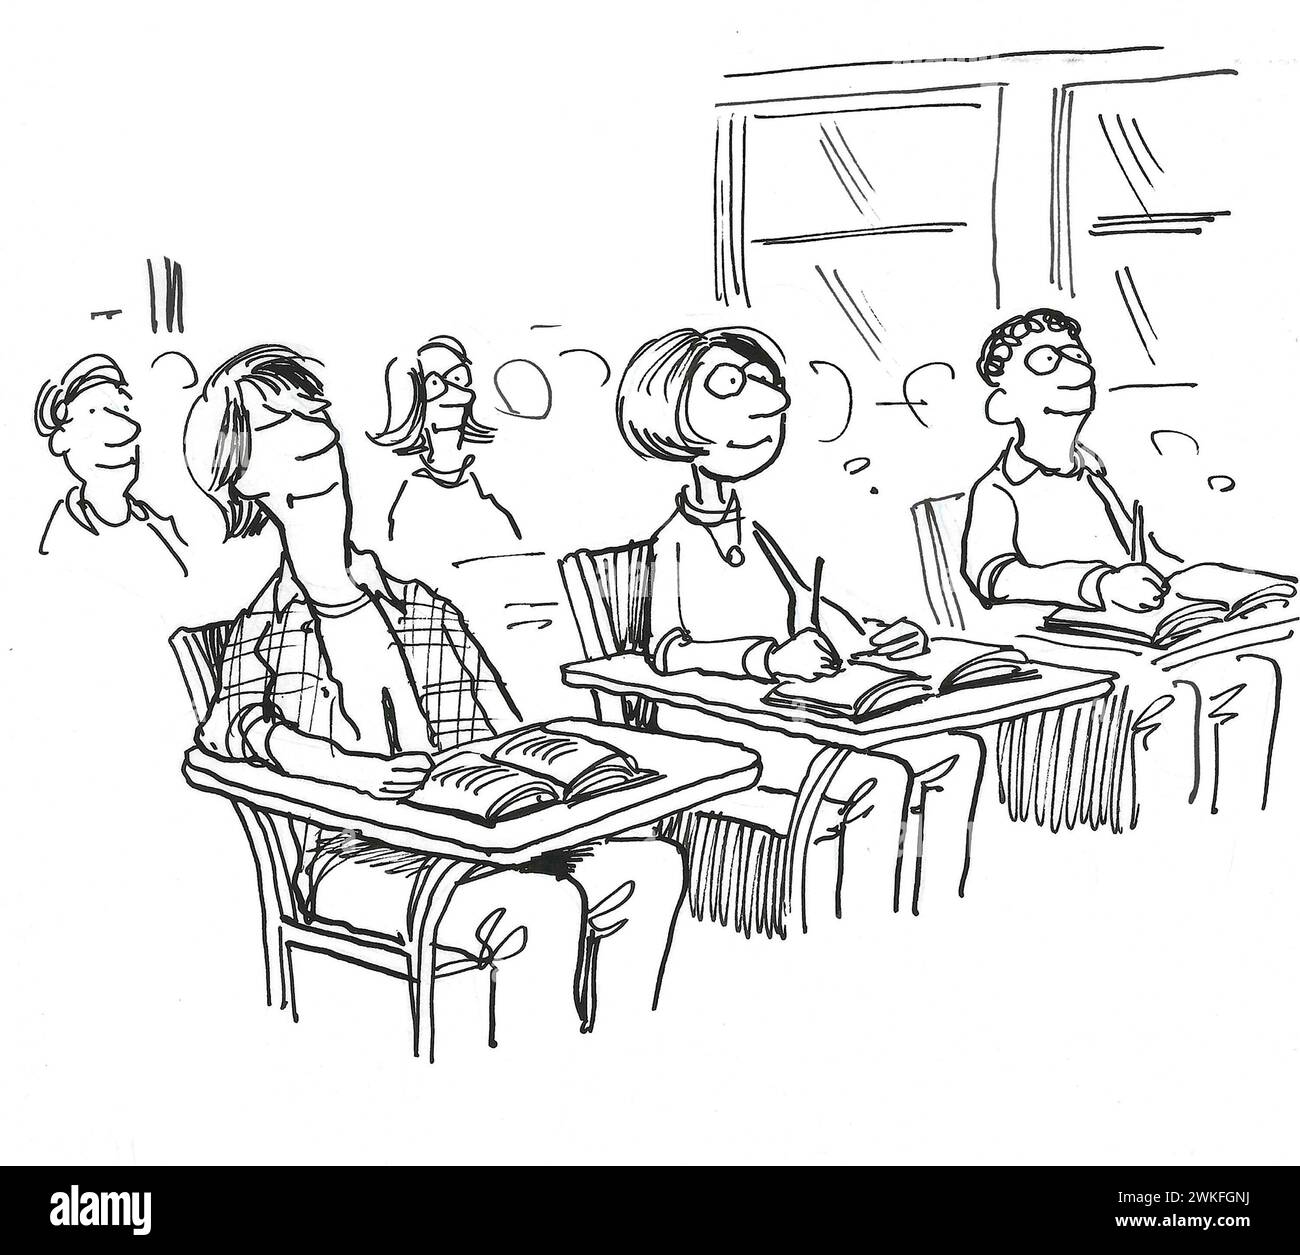 BW cartoon of students in a class, all are paying attention except one boy whose eyes are closed, he is daydreaming. Stock Photo